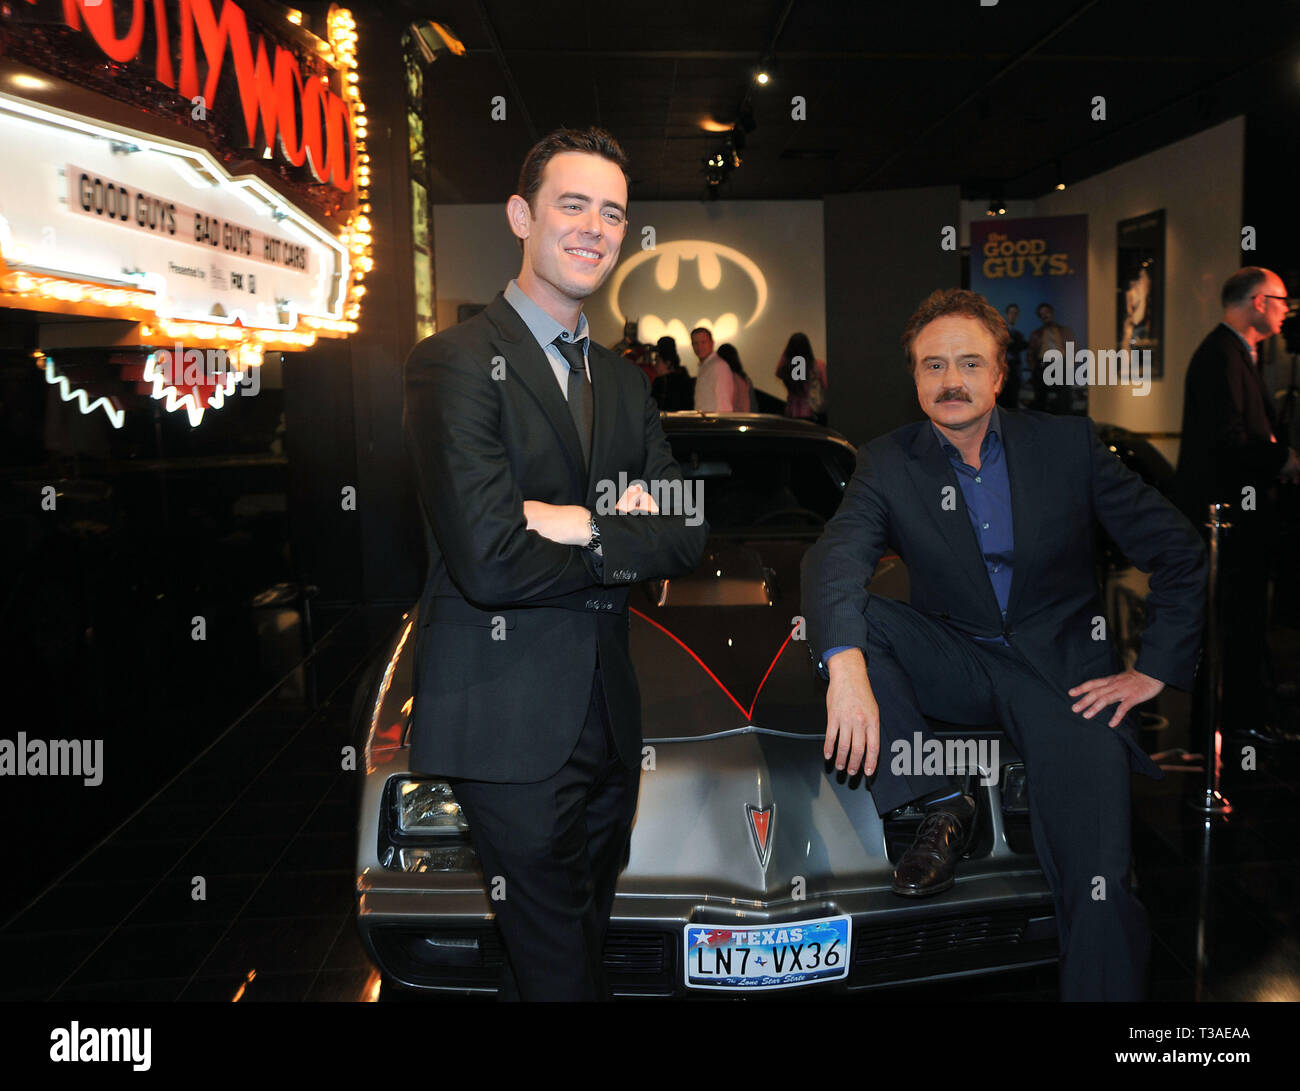 01  Colin Hanks   Bradley Whitford  01   - The Good Guys, Bad Guys, Hot Cars at the  Petersen Automotive Museum In Los Angeles.01  Colin Hanks   Bradley Whitford  01  Event in Hollywood Life - California, Red Carpet Event, USA, Film Industry, Celebrities, Photography, Bestof, Arts Culture and Entertainment, Topix Celebrities fashion, Best of, Hollywood Life, Event in Hollywood Life - California, Red Carpet and backstage, movie celebrities, TV celebrities, Music celebrities, Topix, actors from the same movie, cast and co star together.  inquiry tsuni@Gamma-USA.com, Credit Tsuni / USA, 2010 - Gr Stock Photo